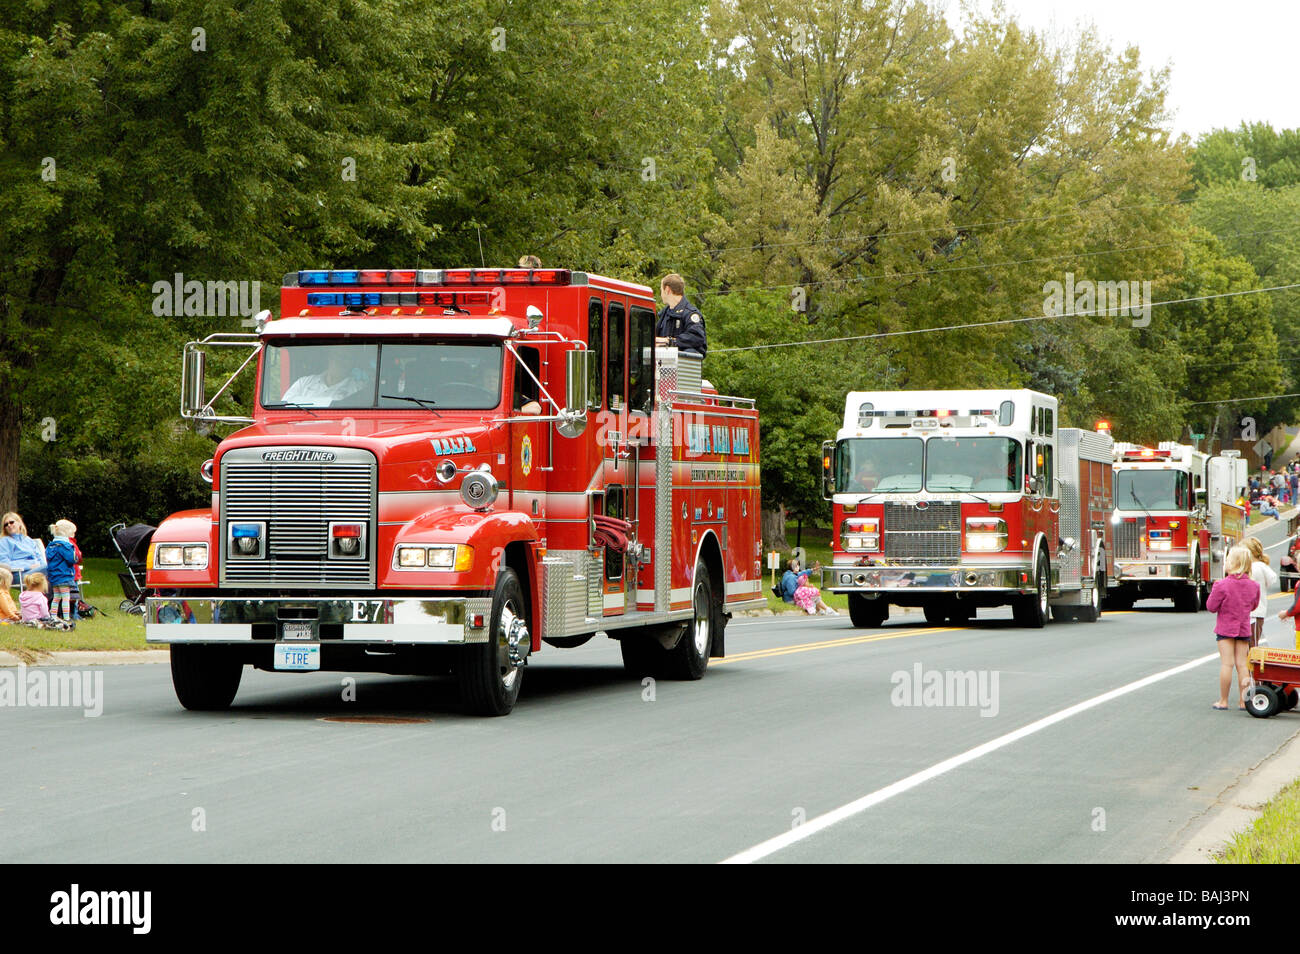 A fire department vehicle being driven in a fire muster parade Stock